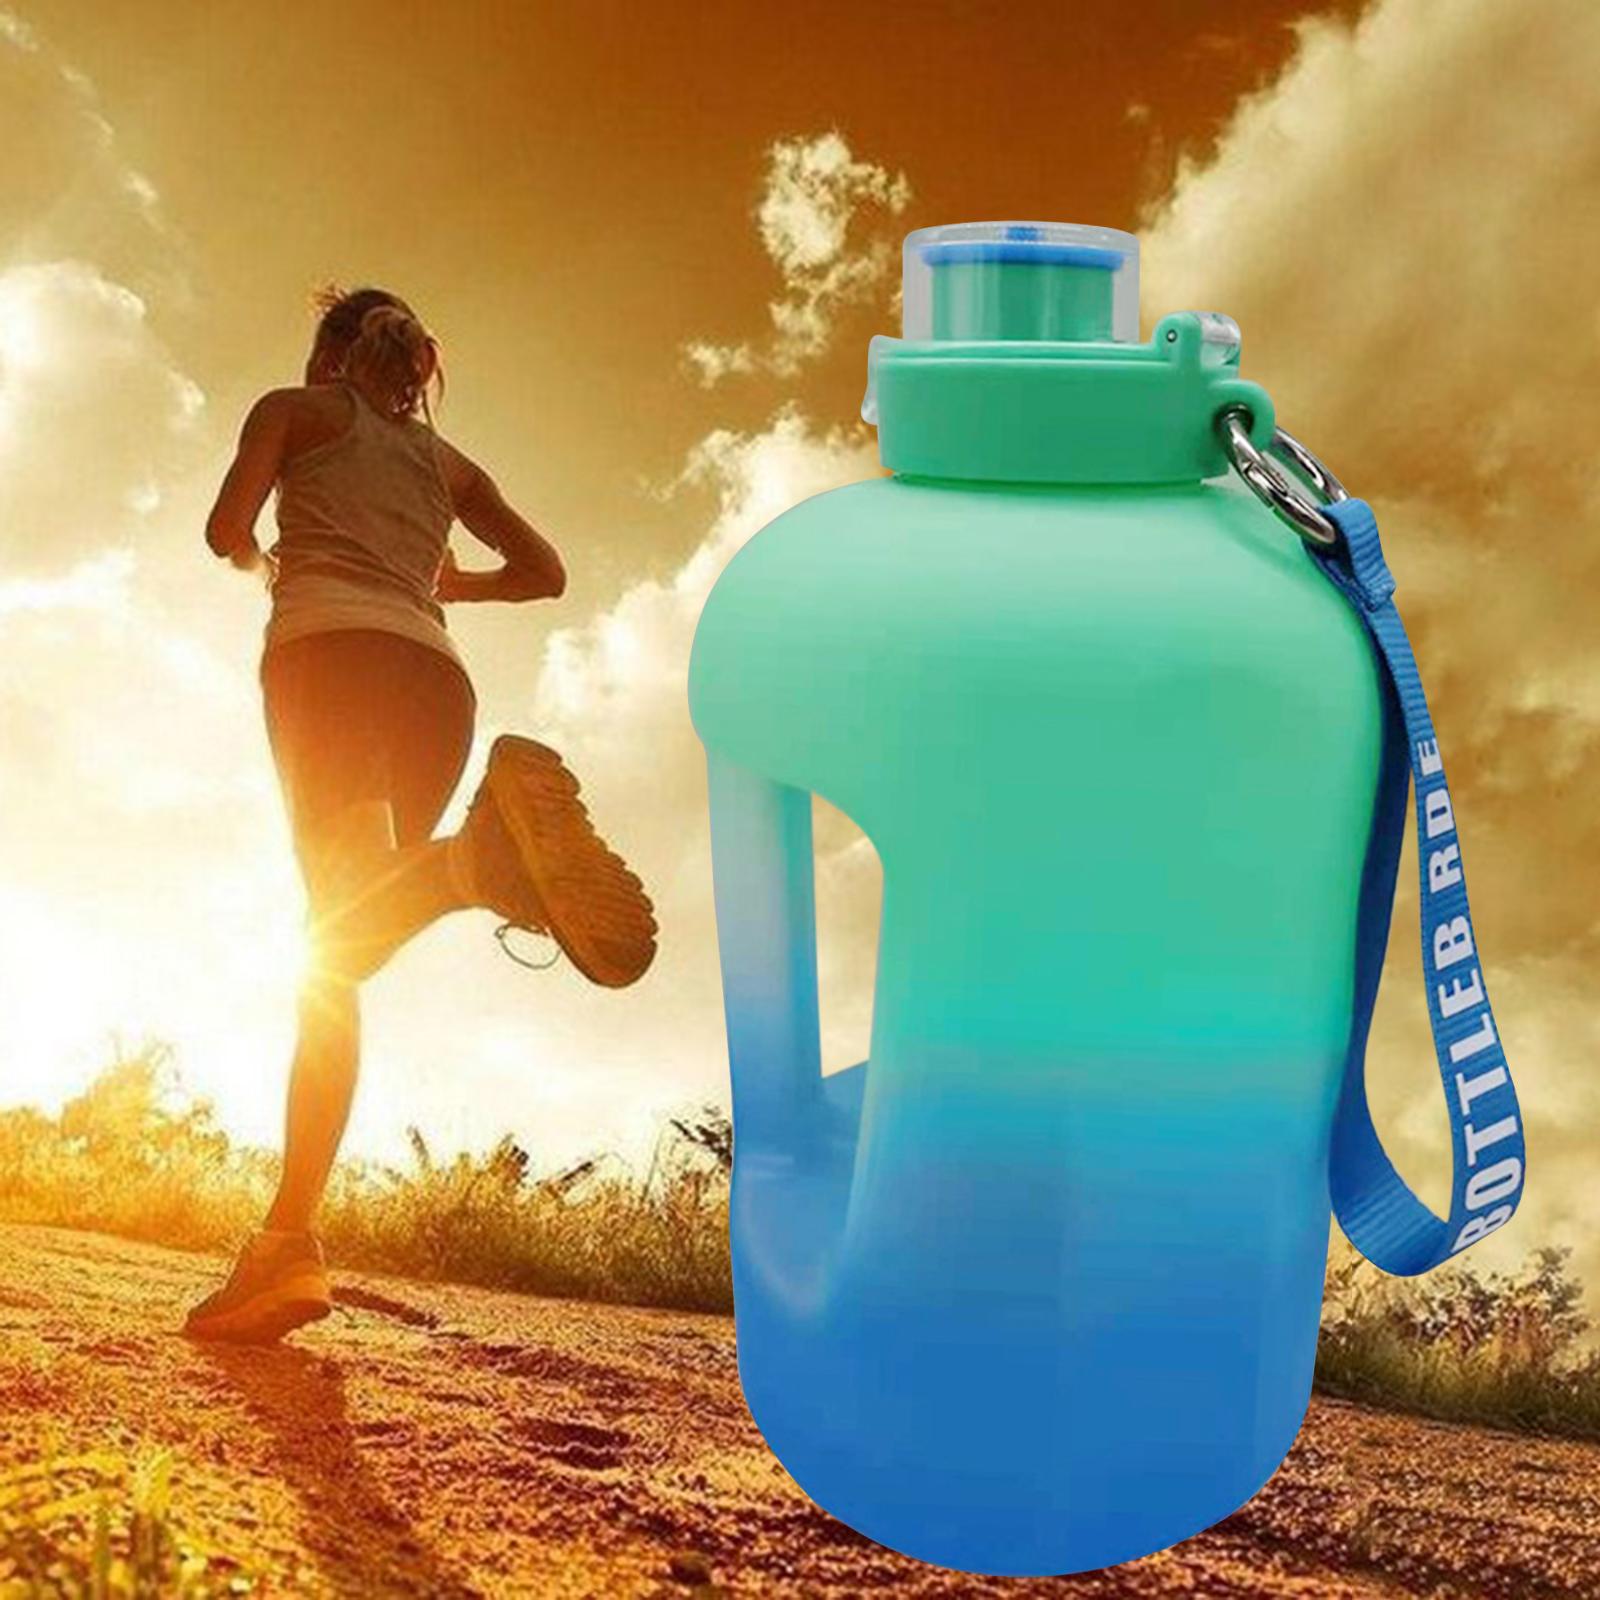 Plastic BPA Free Water Bottle Time Reminder Jug for Camping Outdoor Activity Green Blue